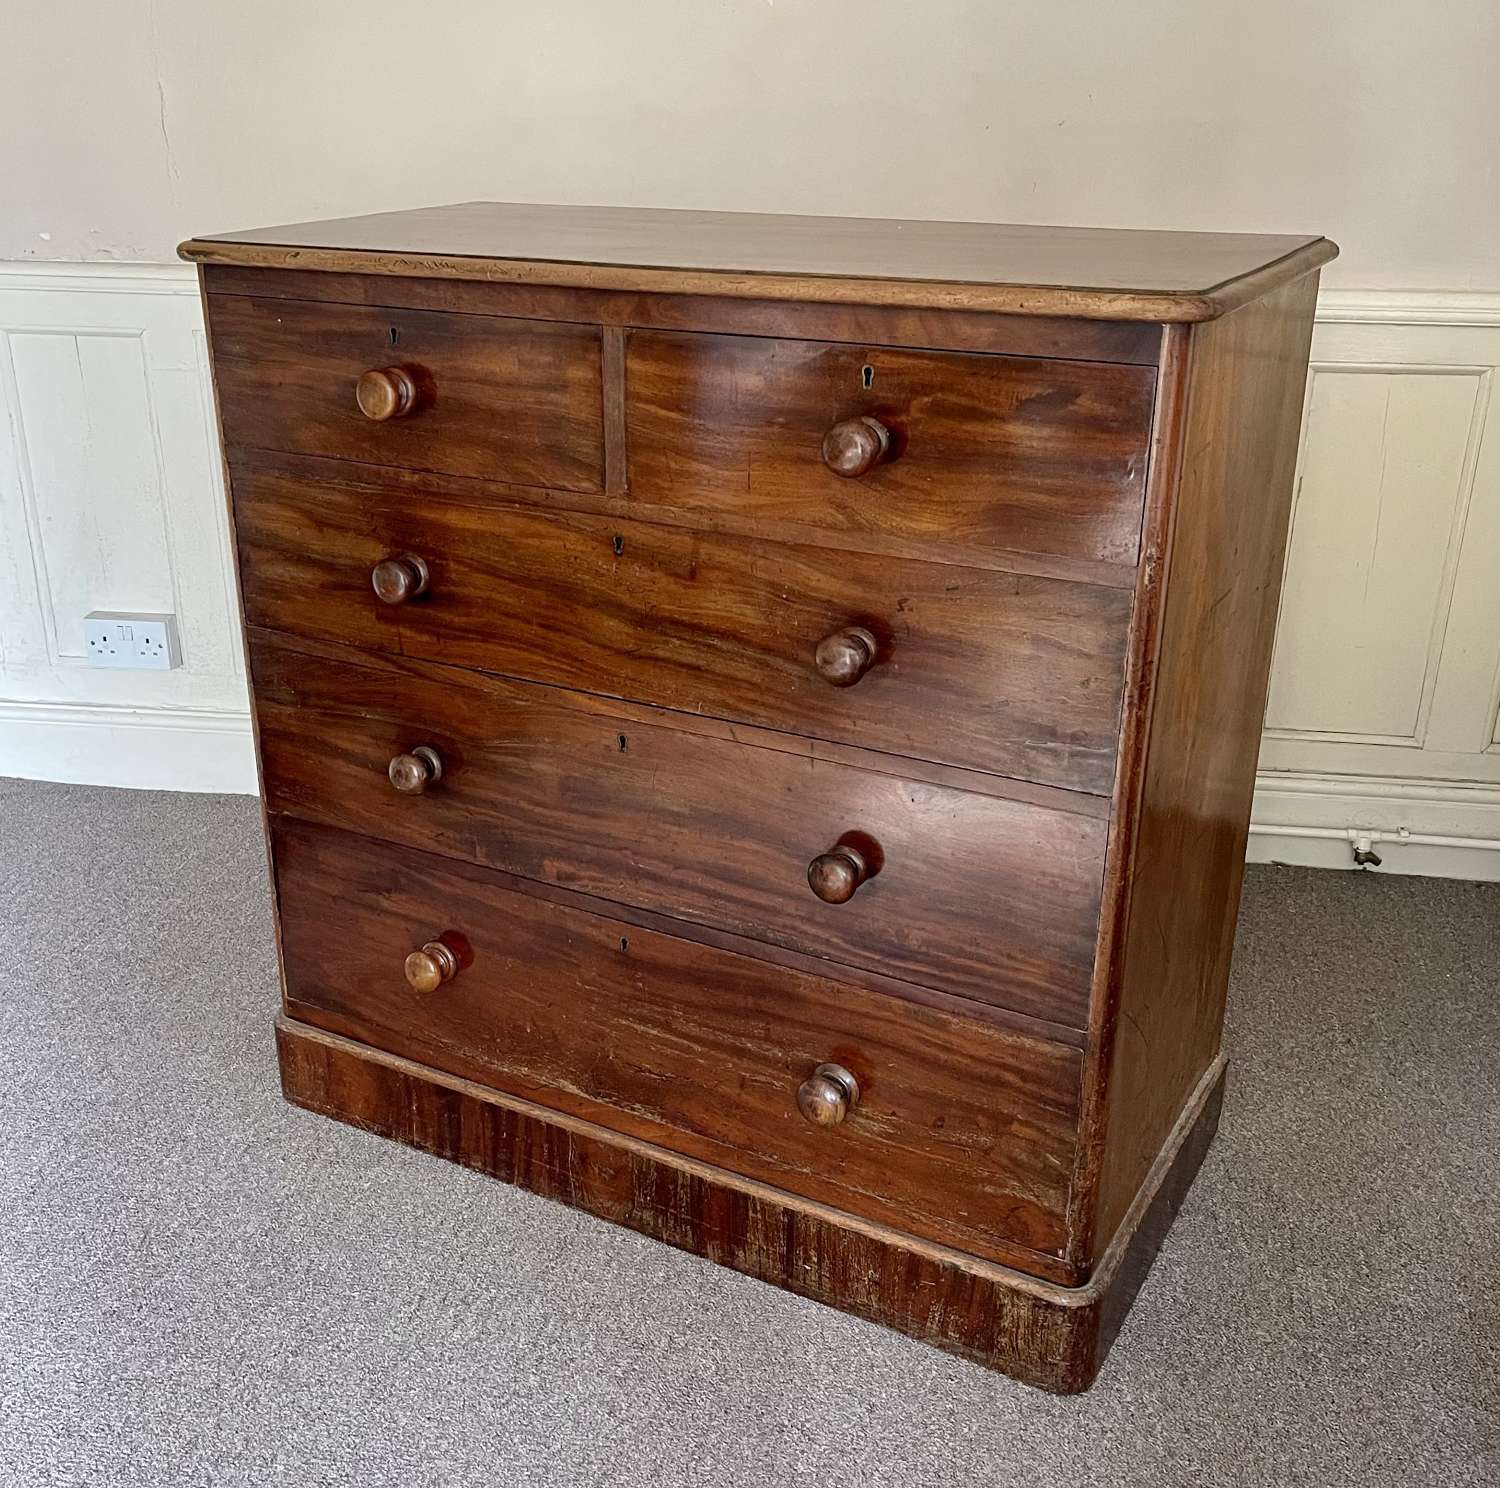 A Heal's and son chest of drawers.